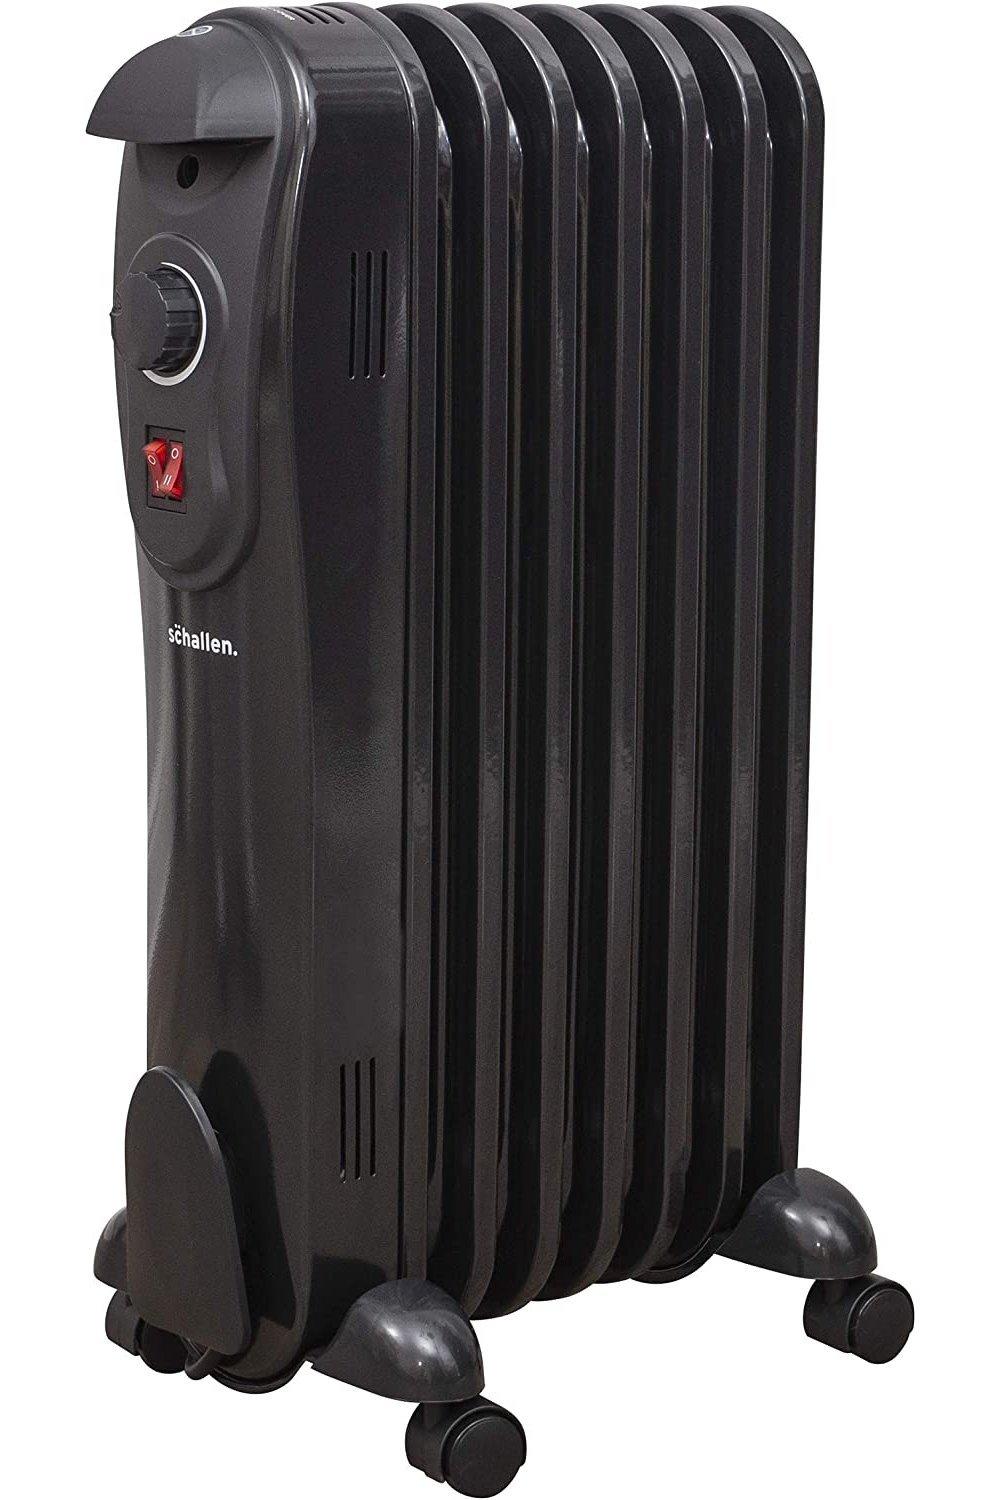 Black Portable Electric Slim Oil Filled Radiator Heater with Adjustable Temperature Thermostat, 3 Heat Settings & Safety Cut Off (1500W - 7 Fin)